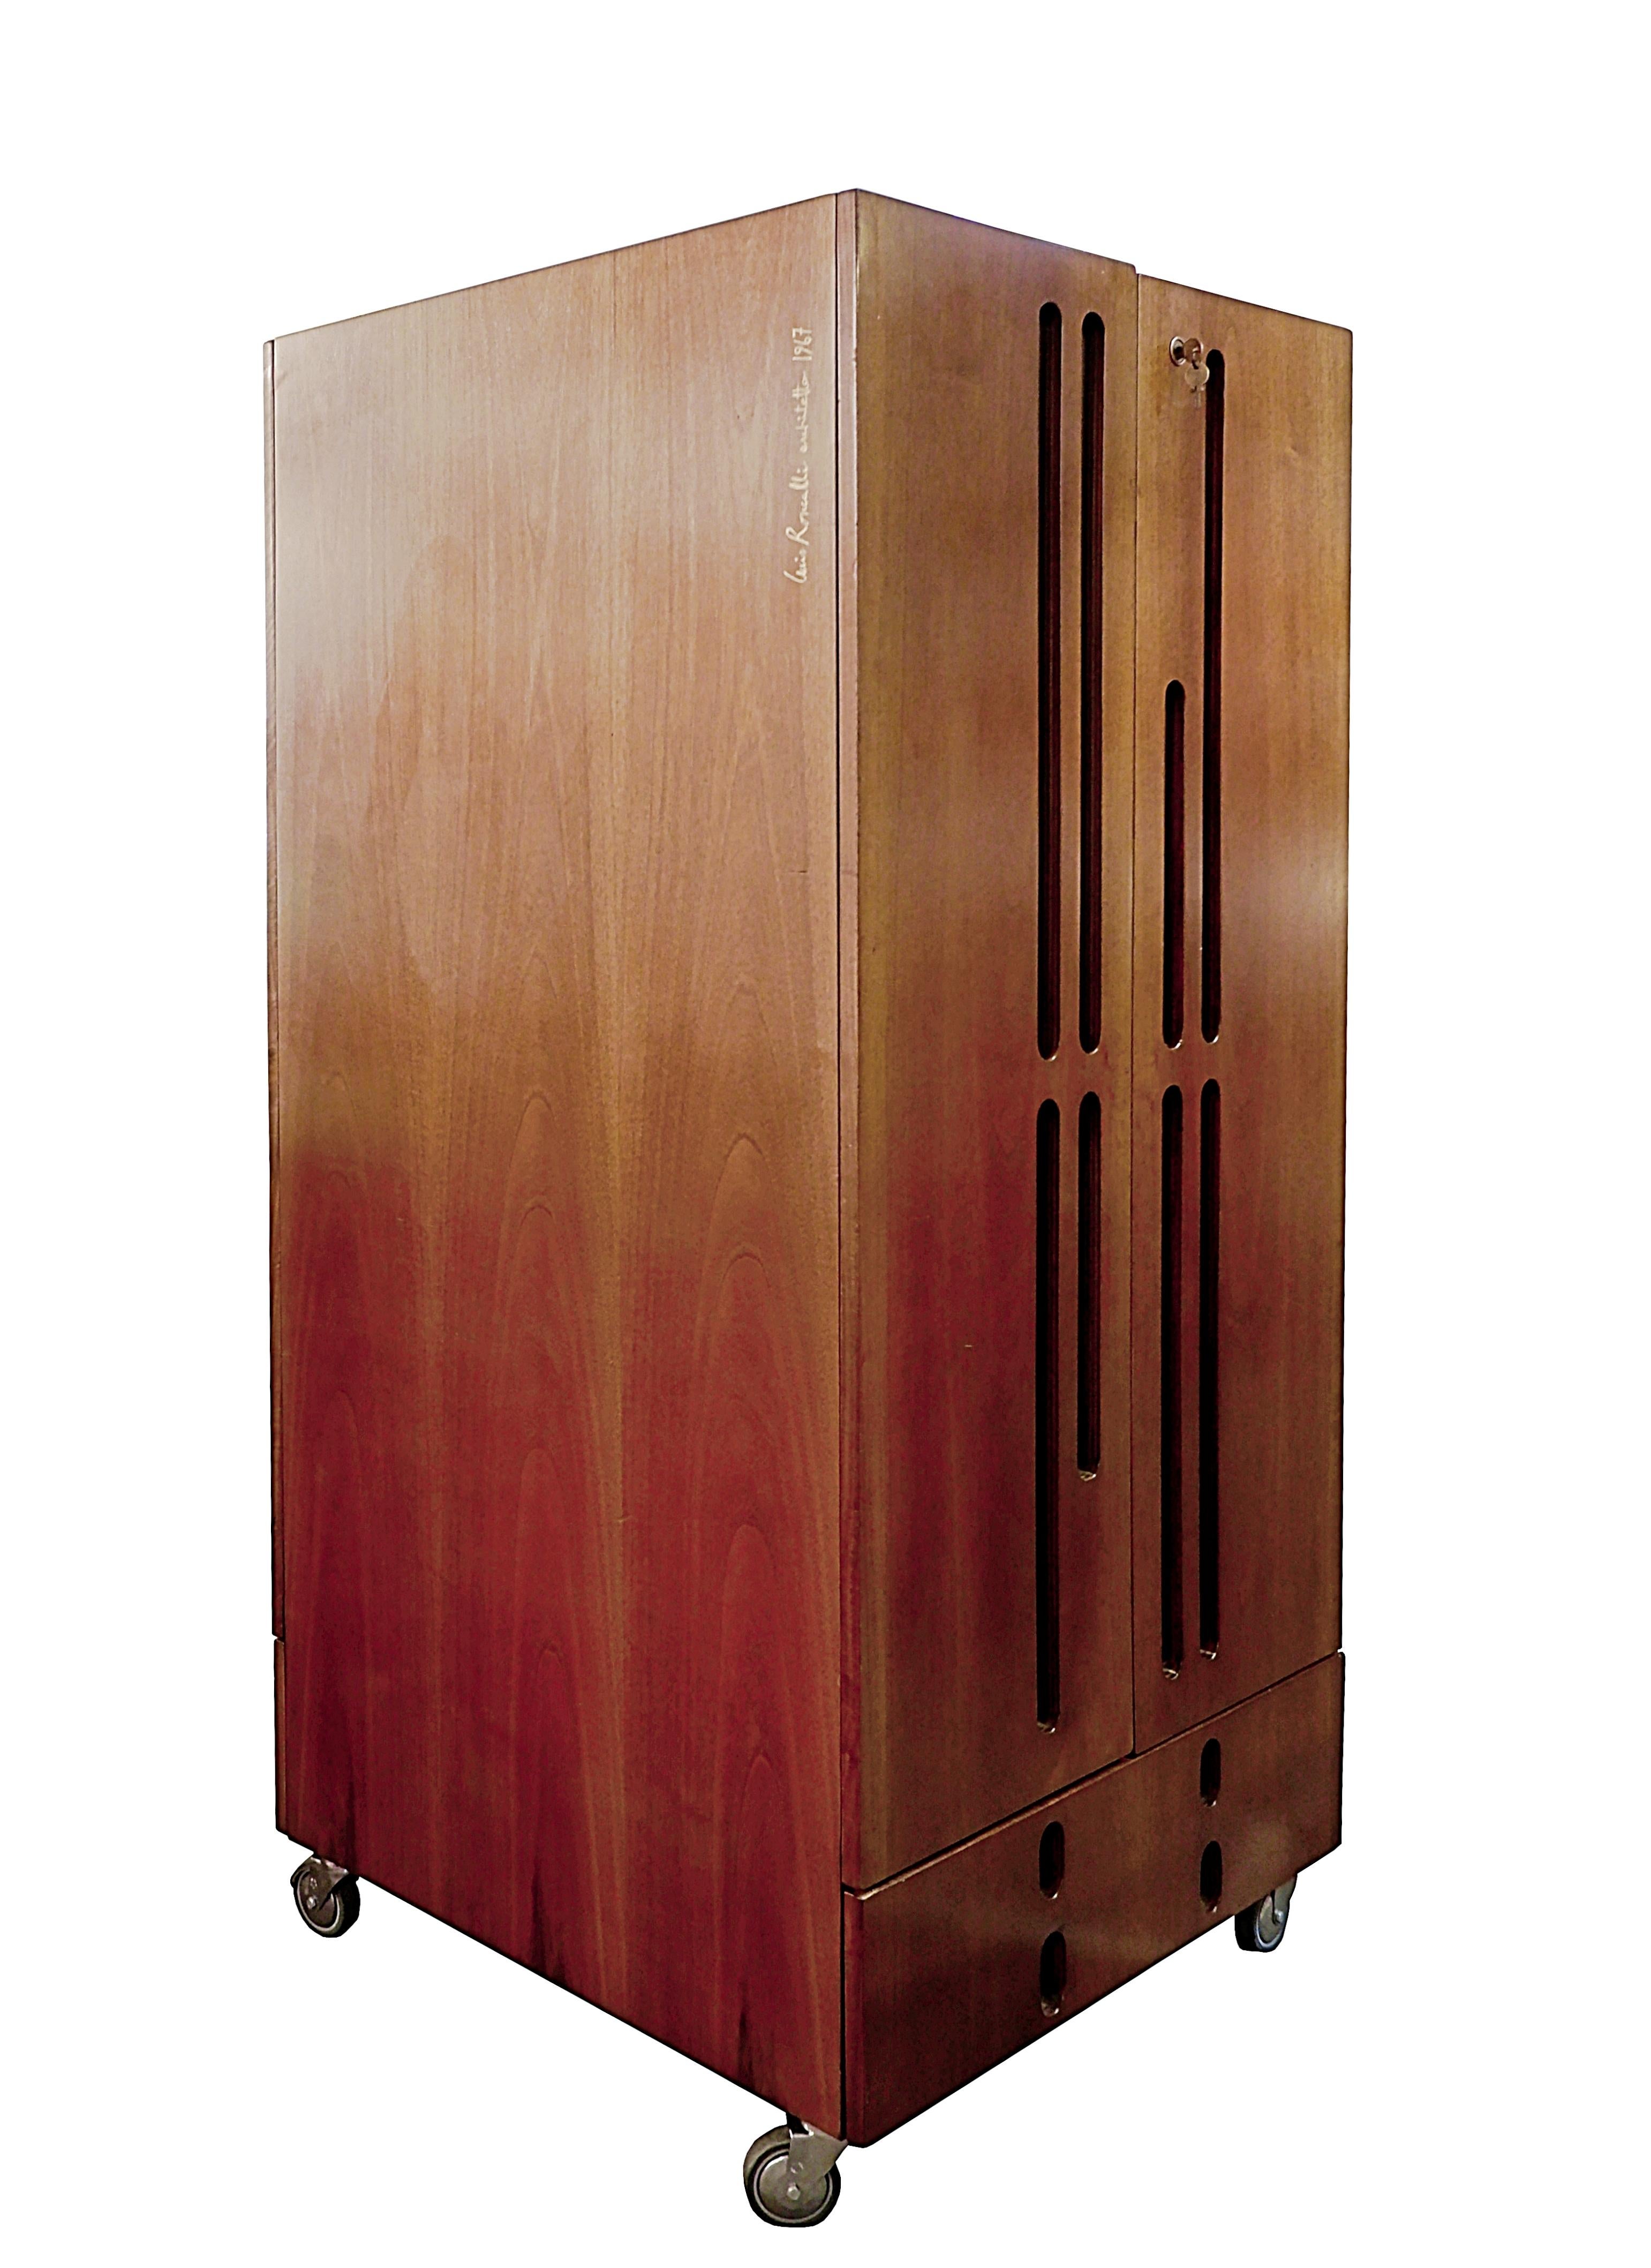 Italian Double-Sided Mobile Wardrobe Cabinet, Signed Roncalli Architetto, 1967 For Sale